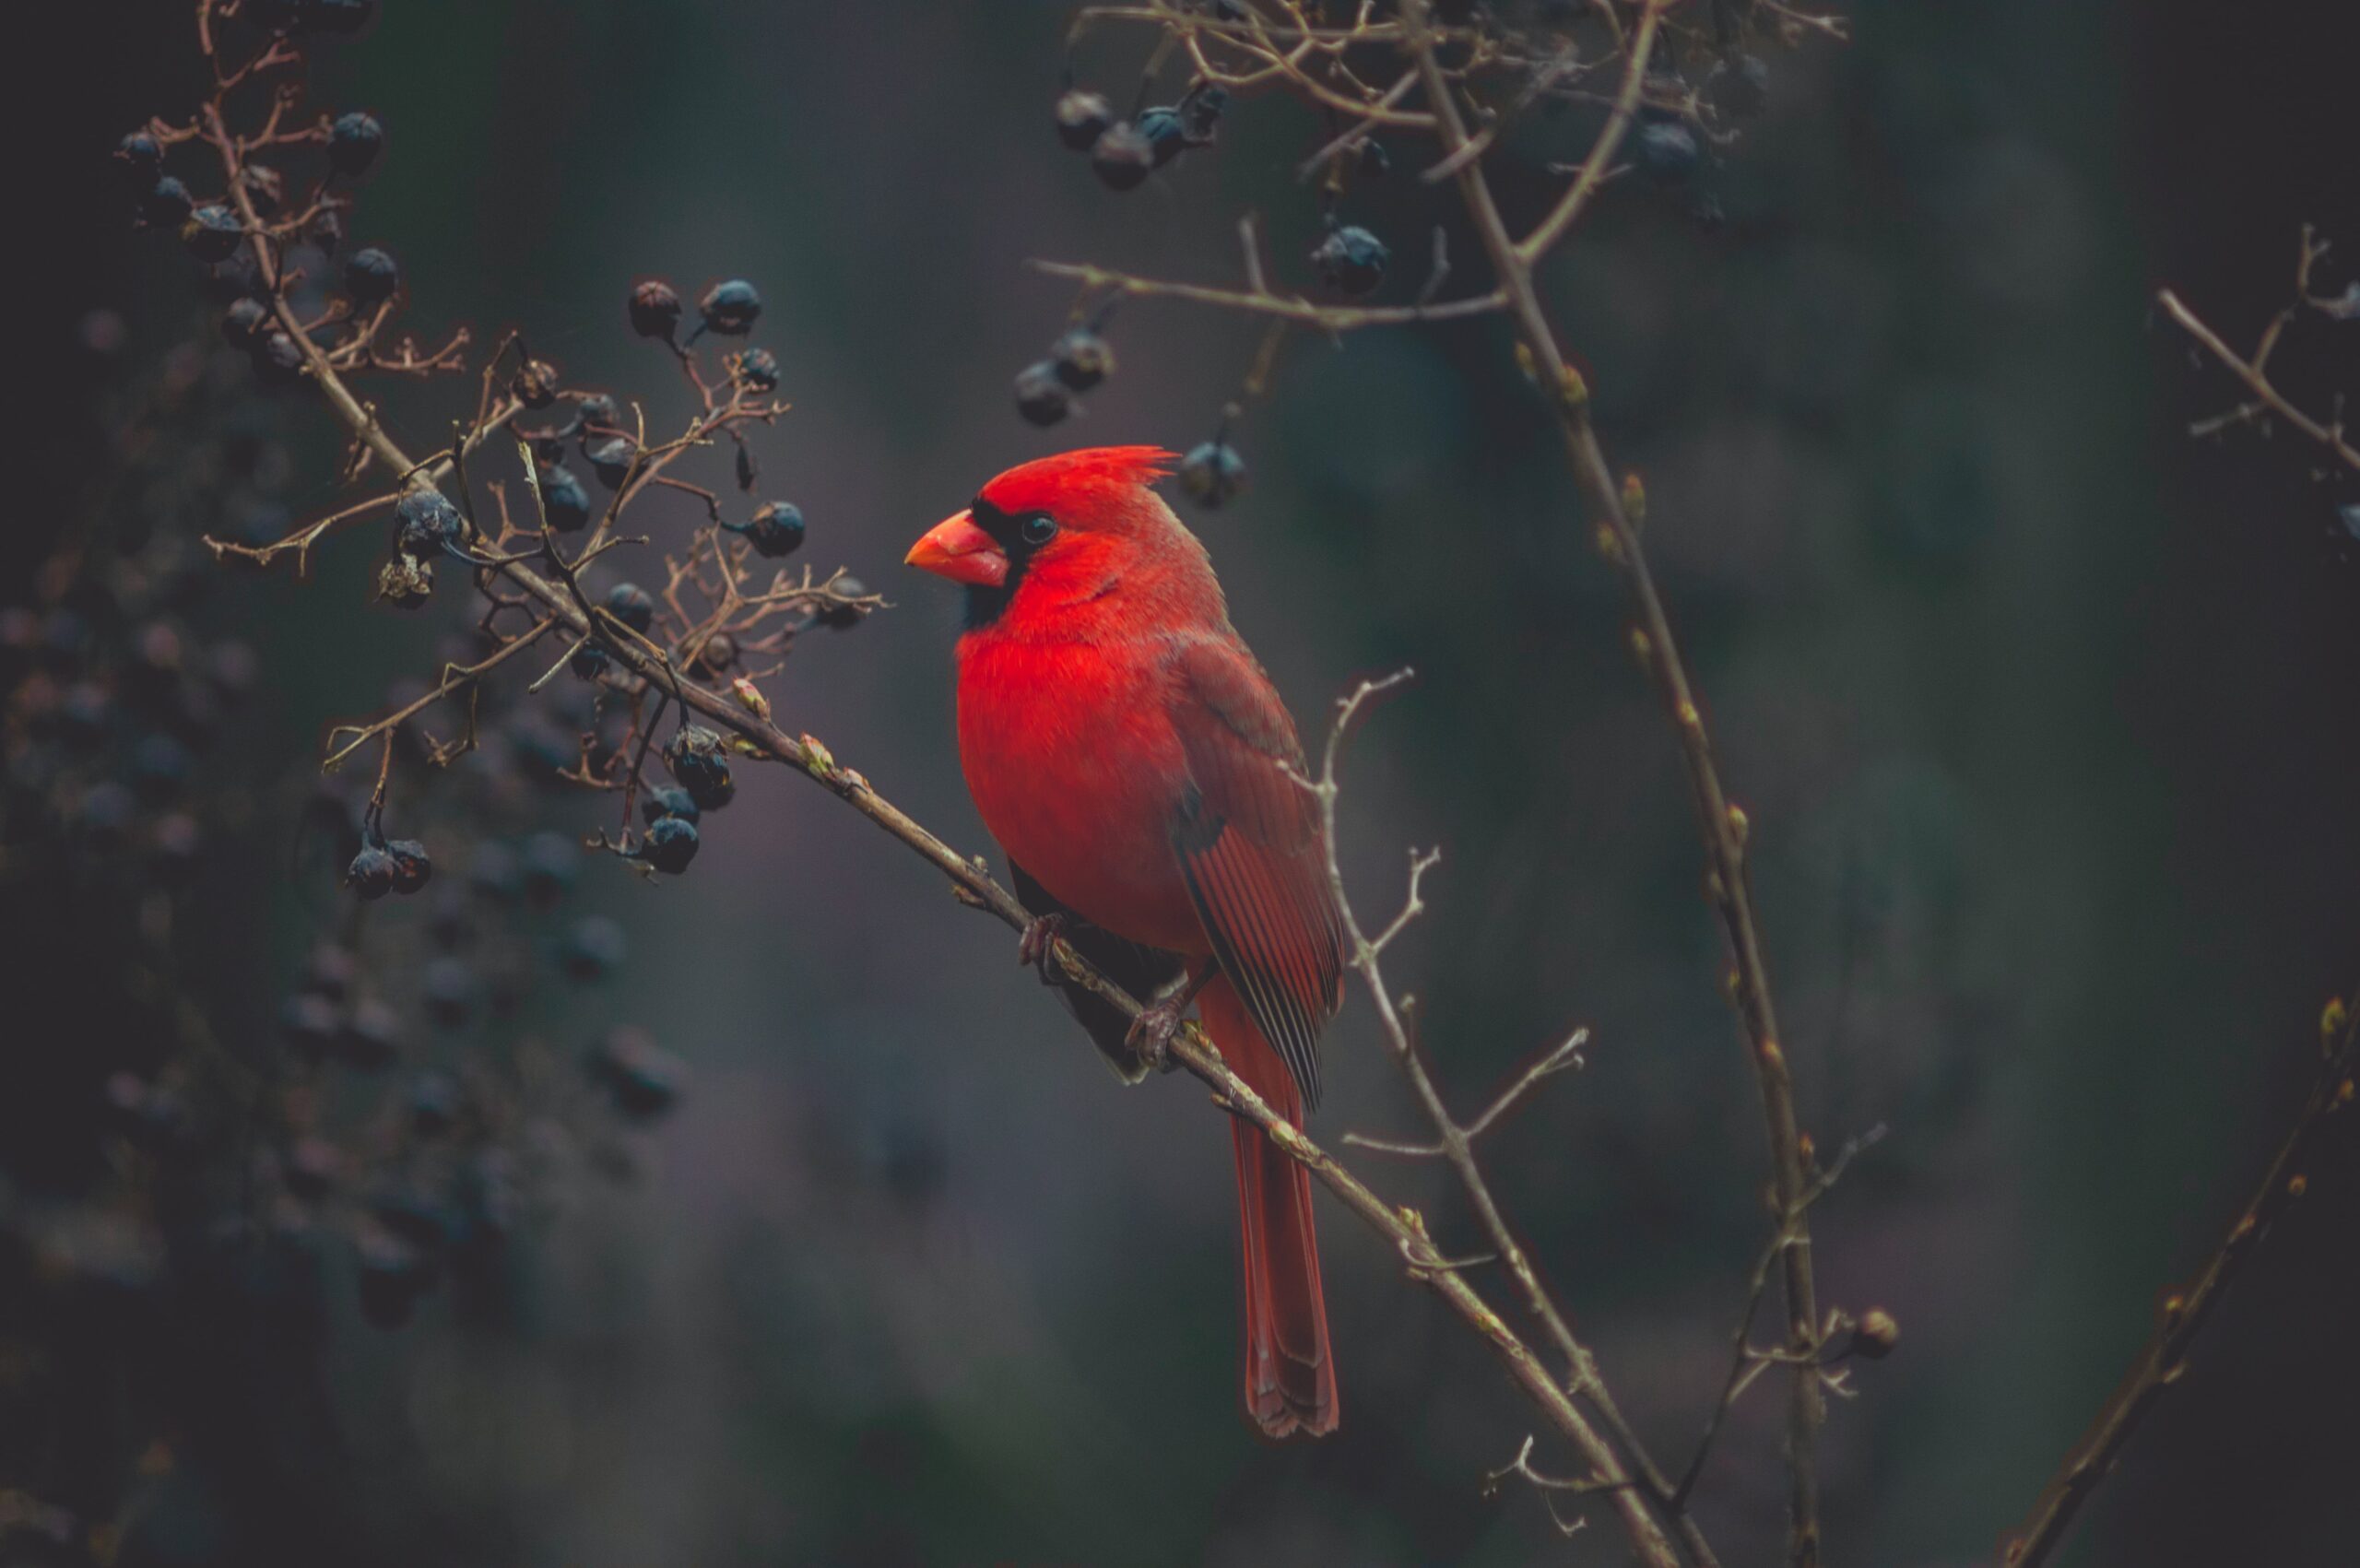 A Red Color Bird Sitting on a Dried Branch